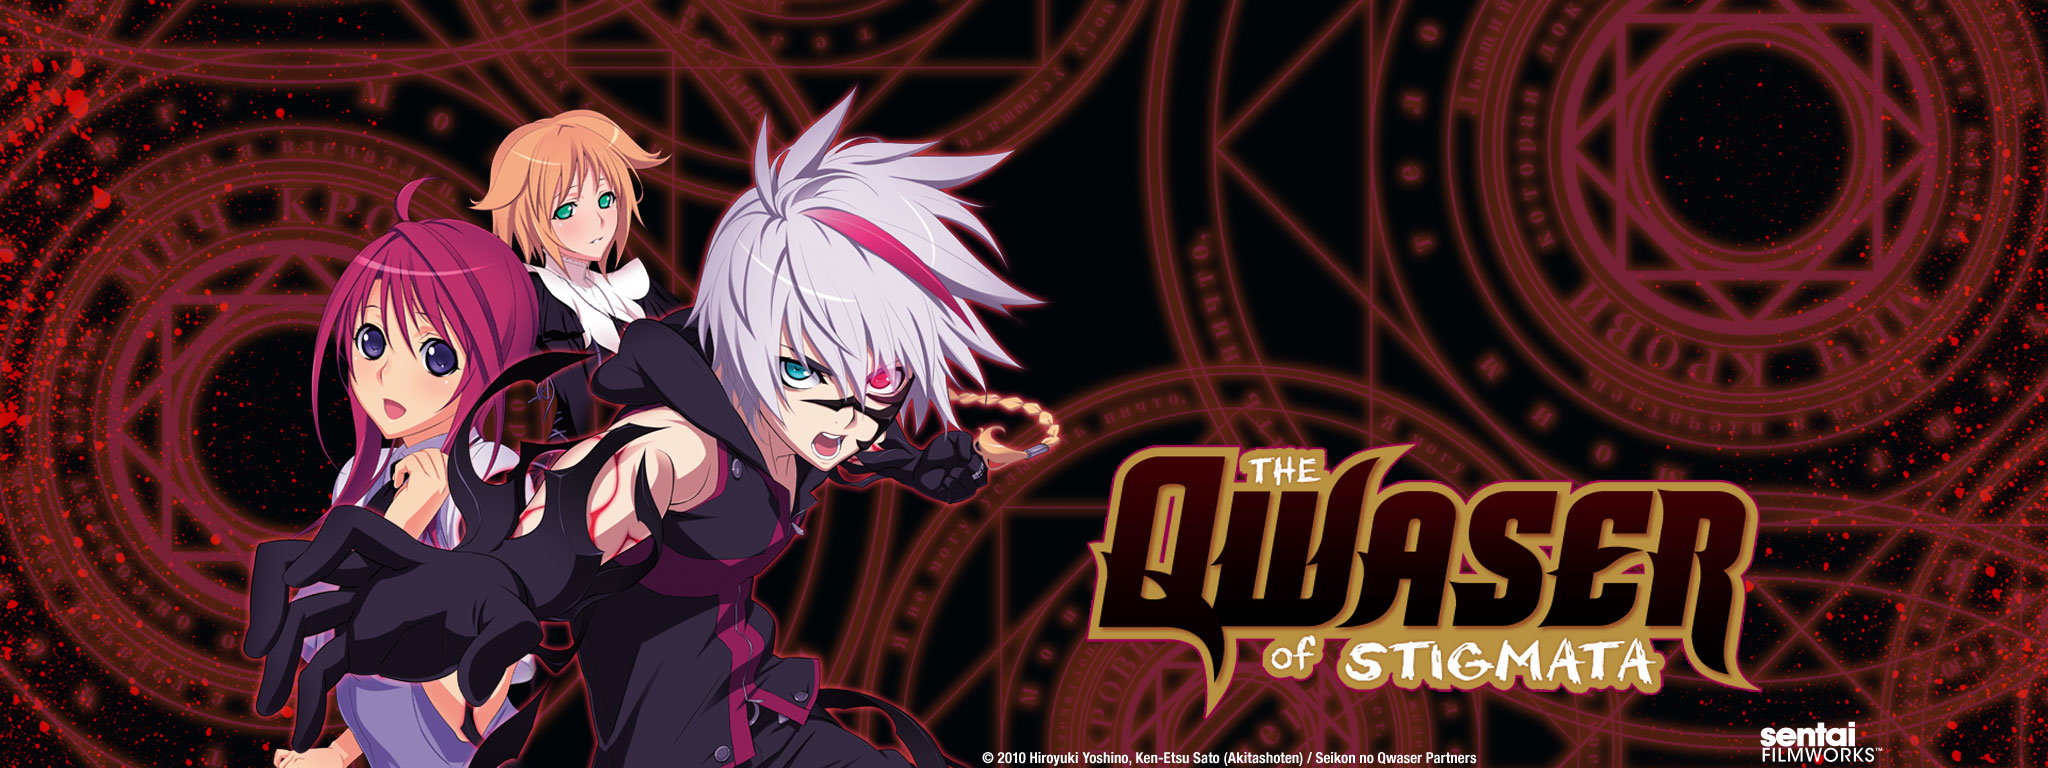 HQ The Qwaser Of Stigmata Wallpapers | File 339.81Kb